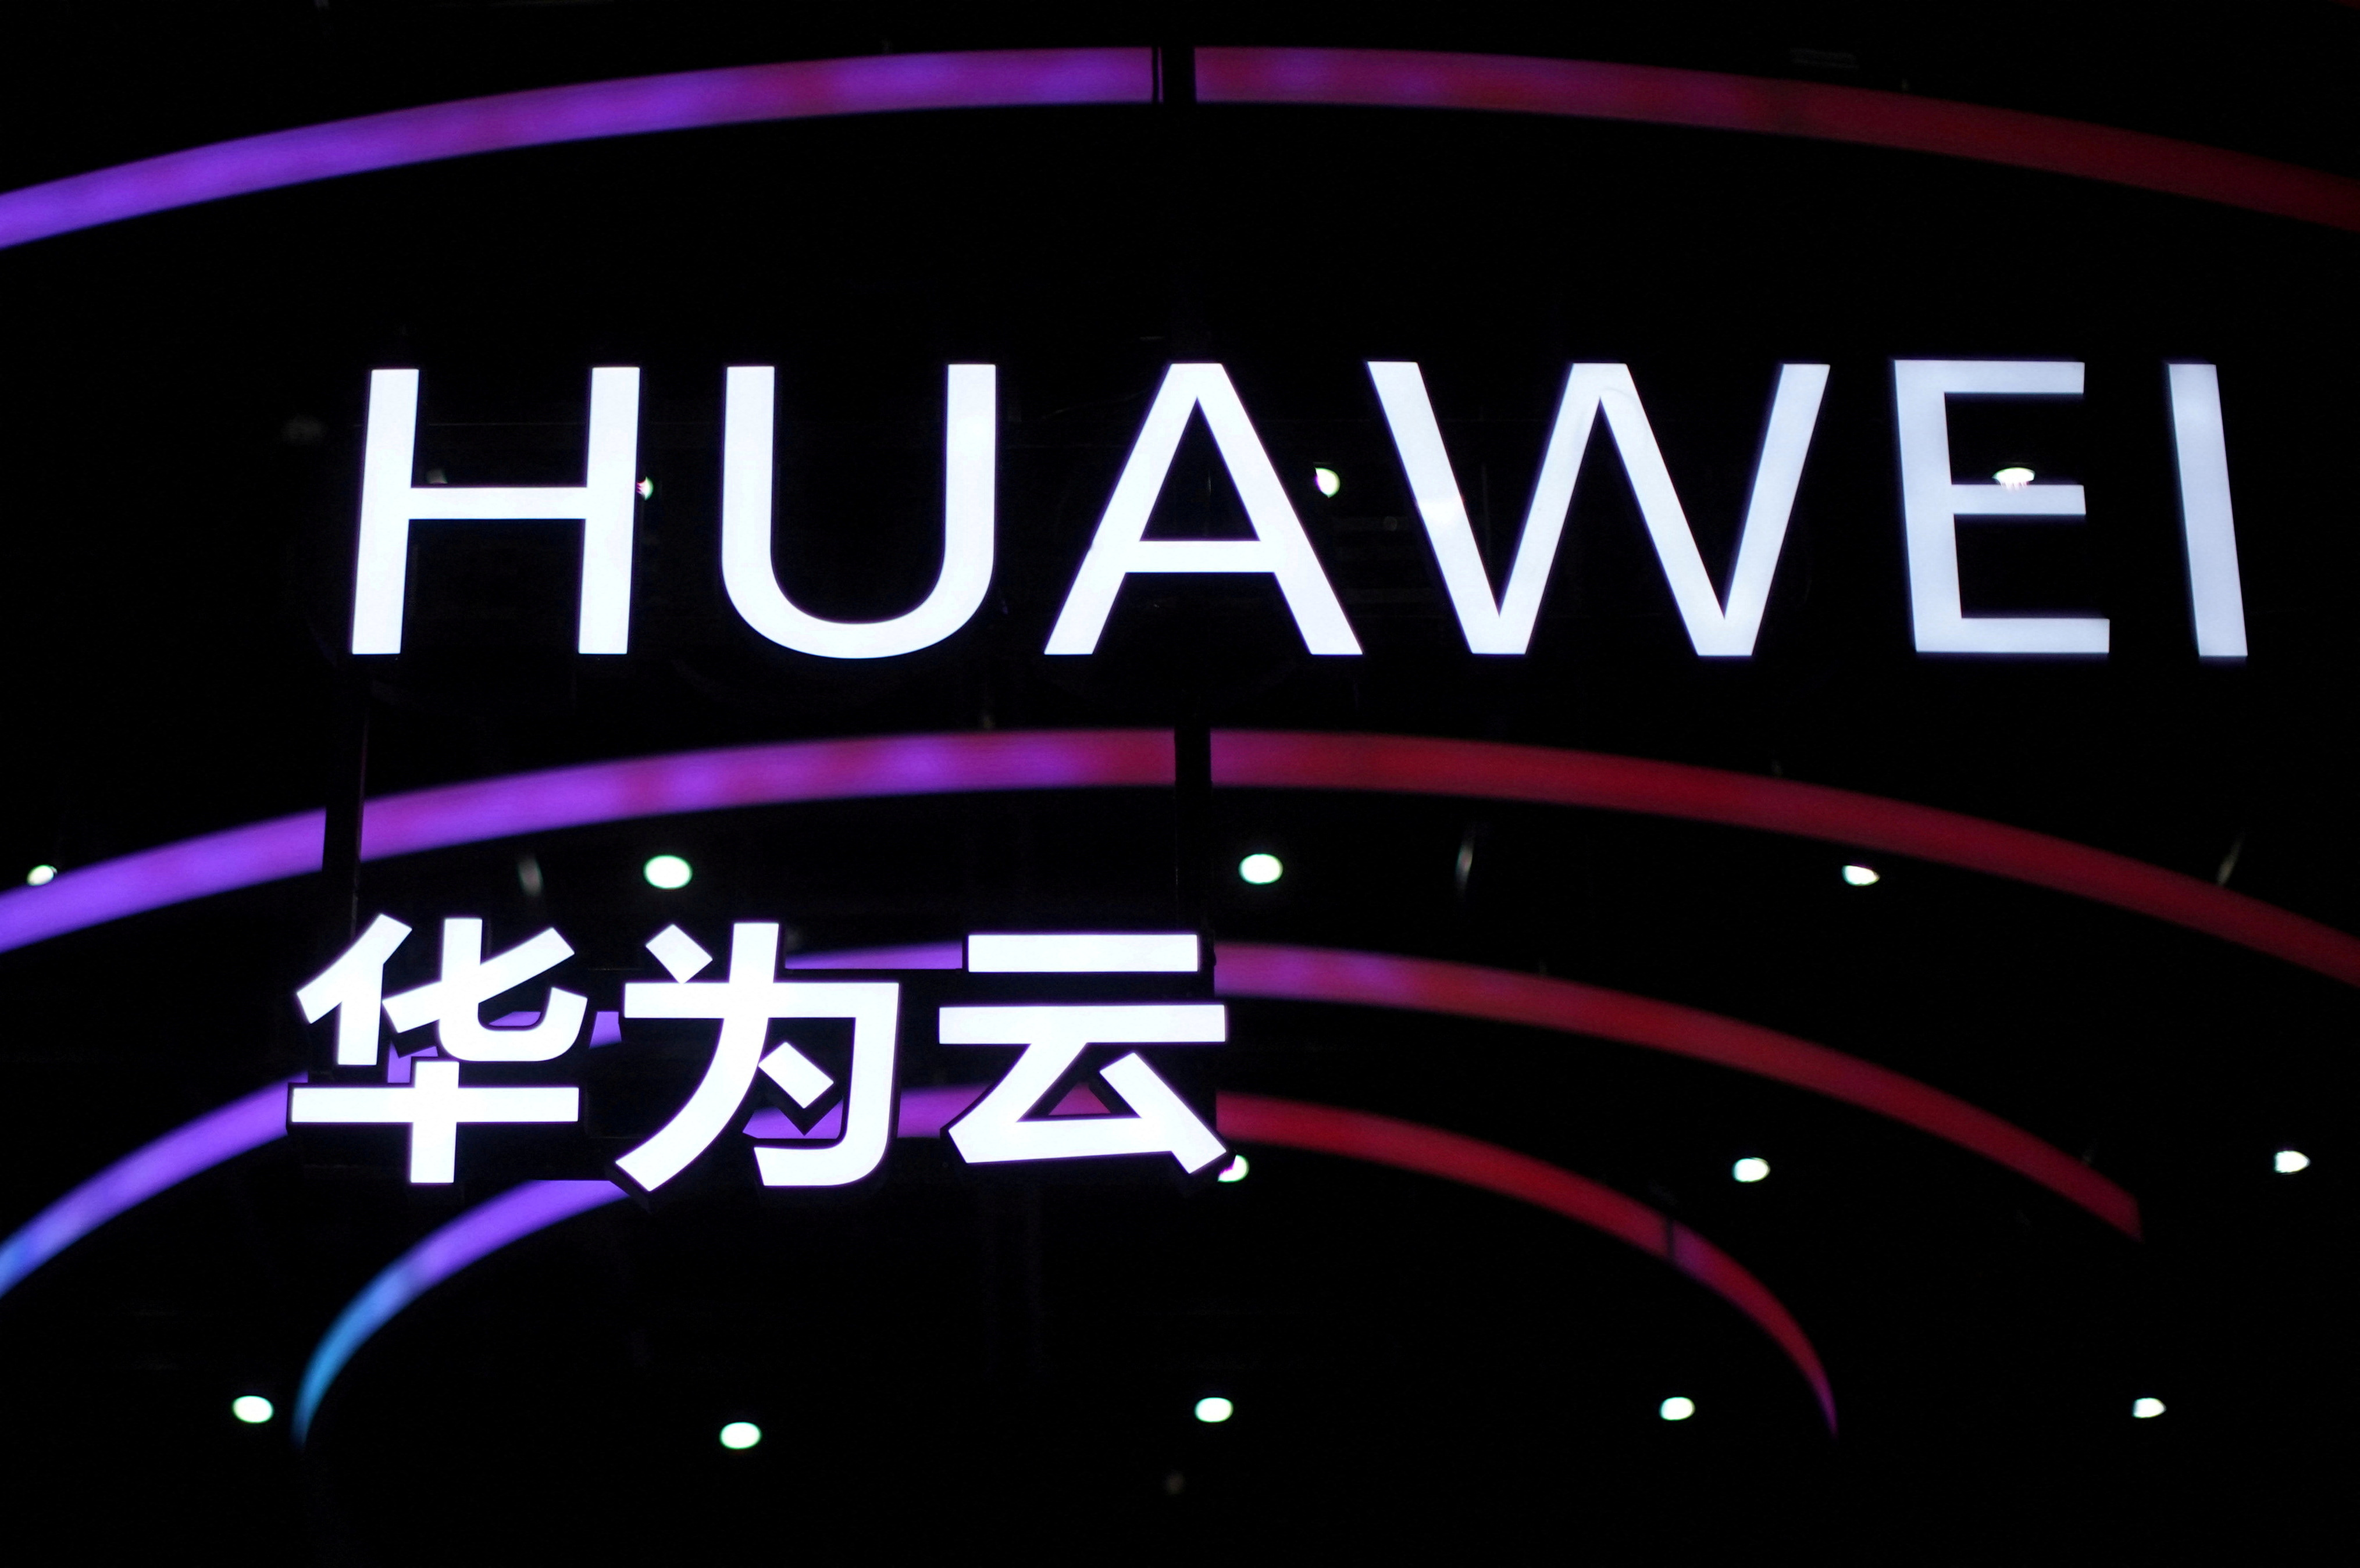 Letterings that form the name of Chinese smartphone and telecoms equipment maker Huawei are seen during Huawei Connect in Shanghai